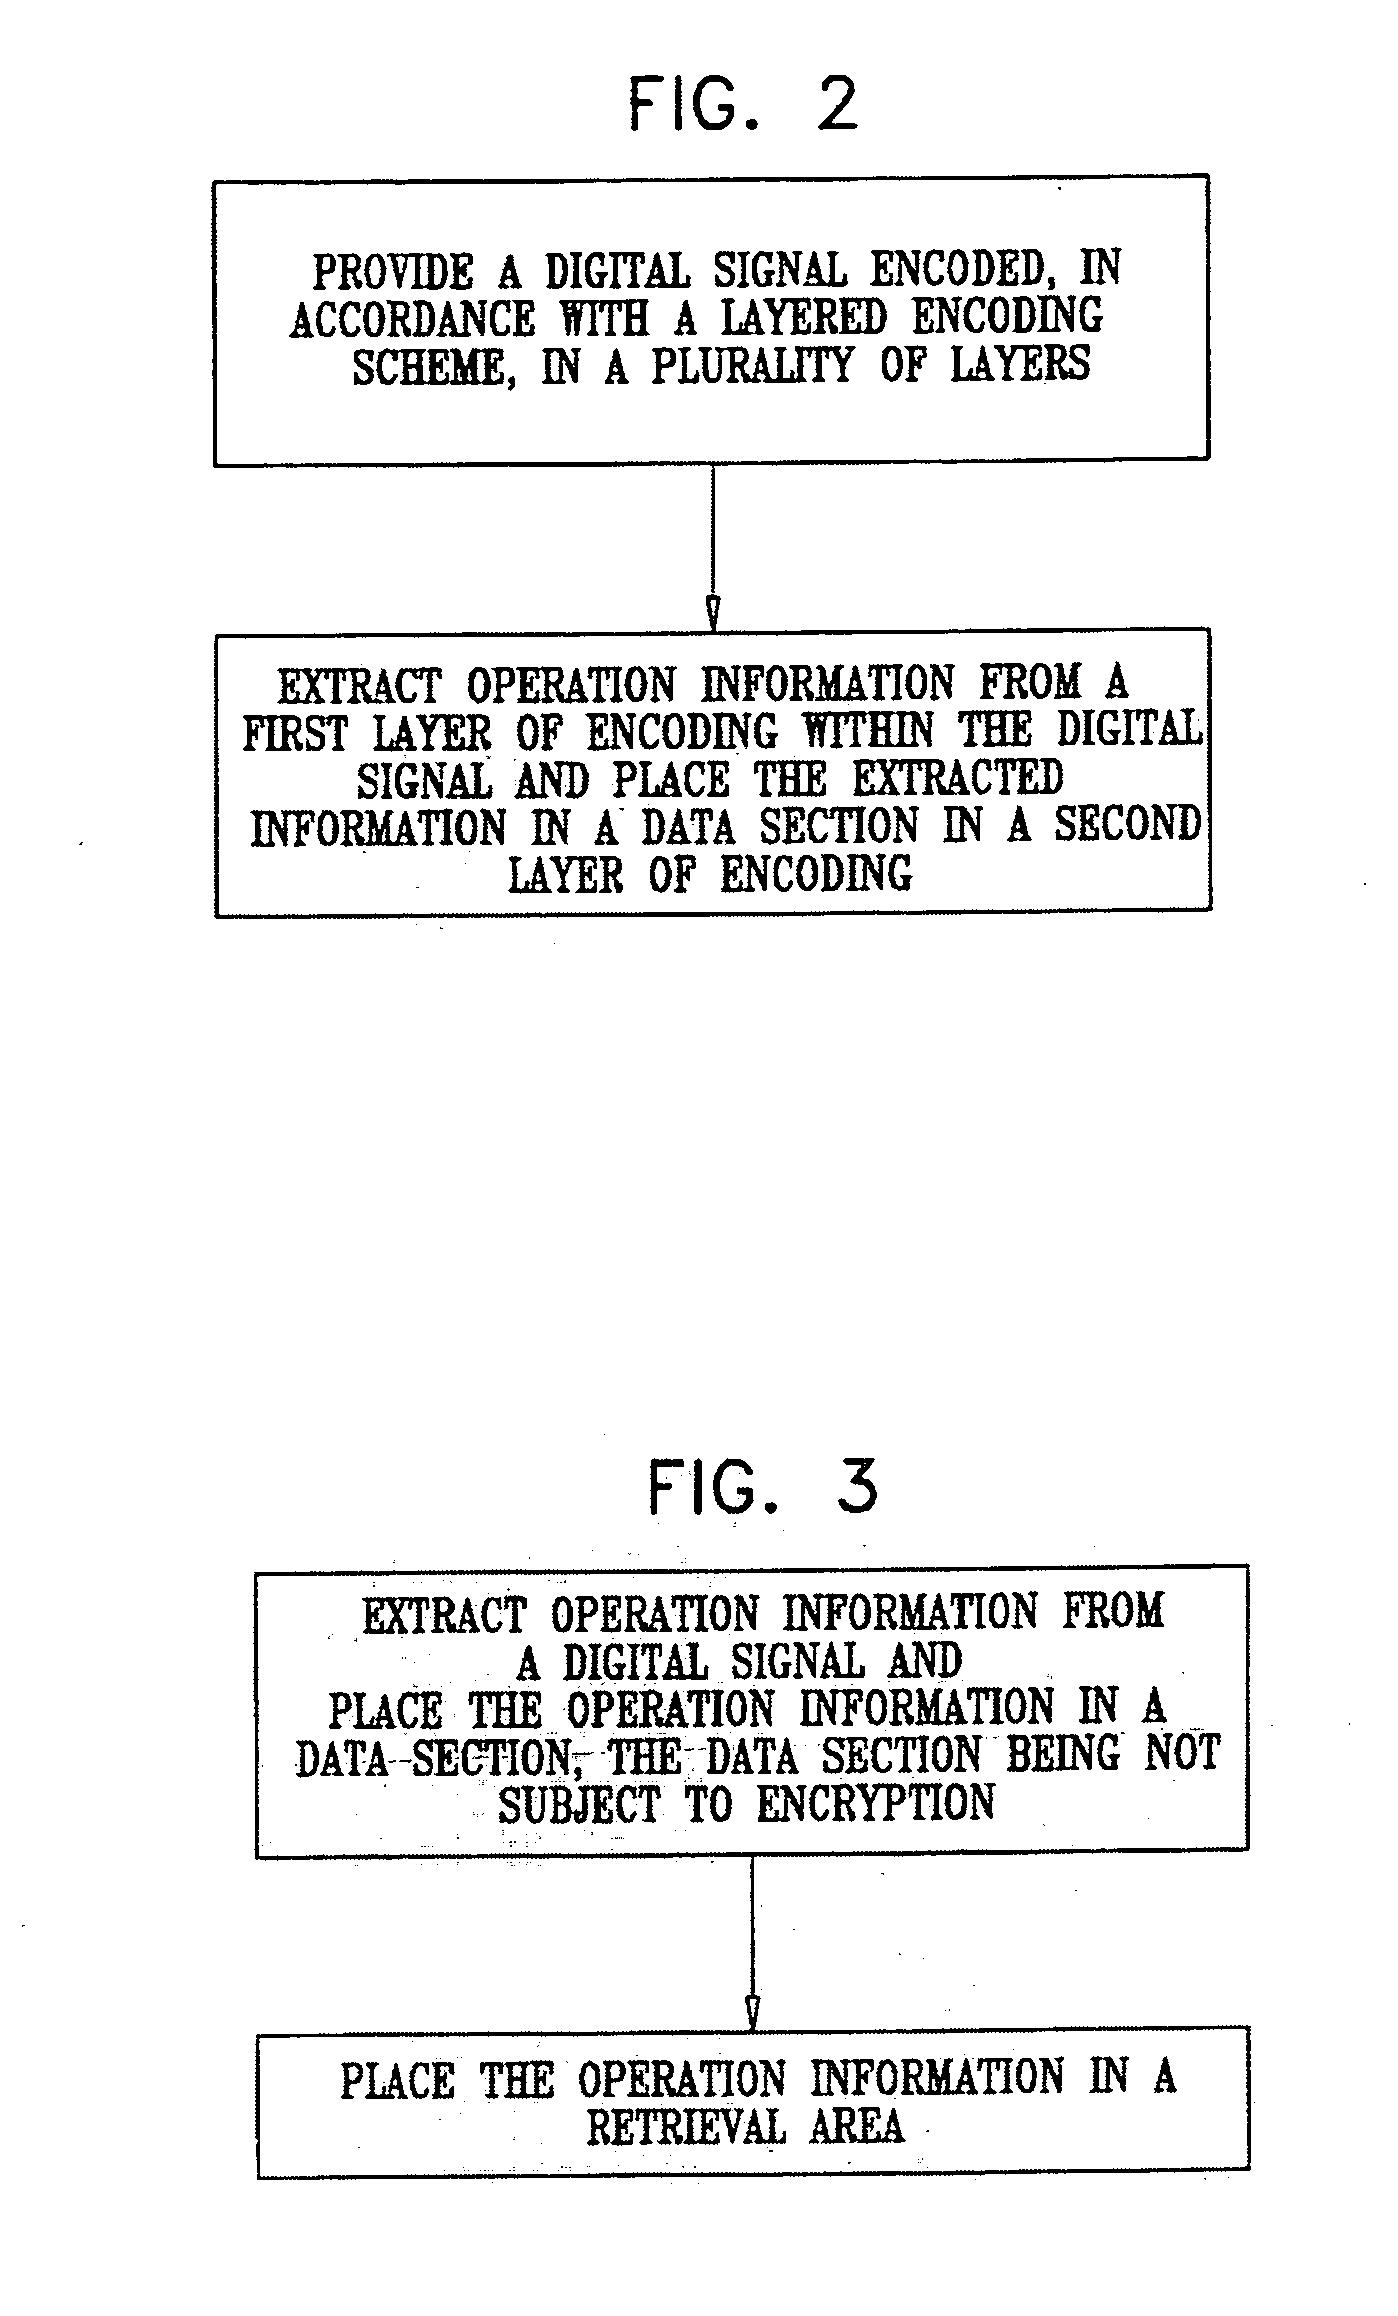 System for providing access to operation information